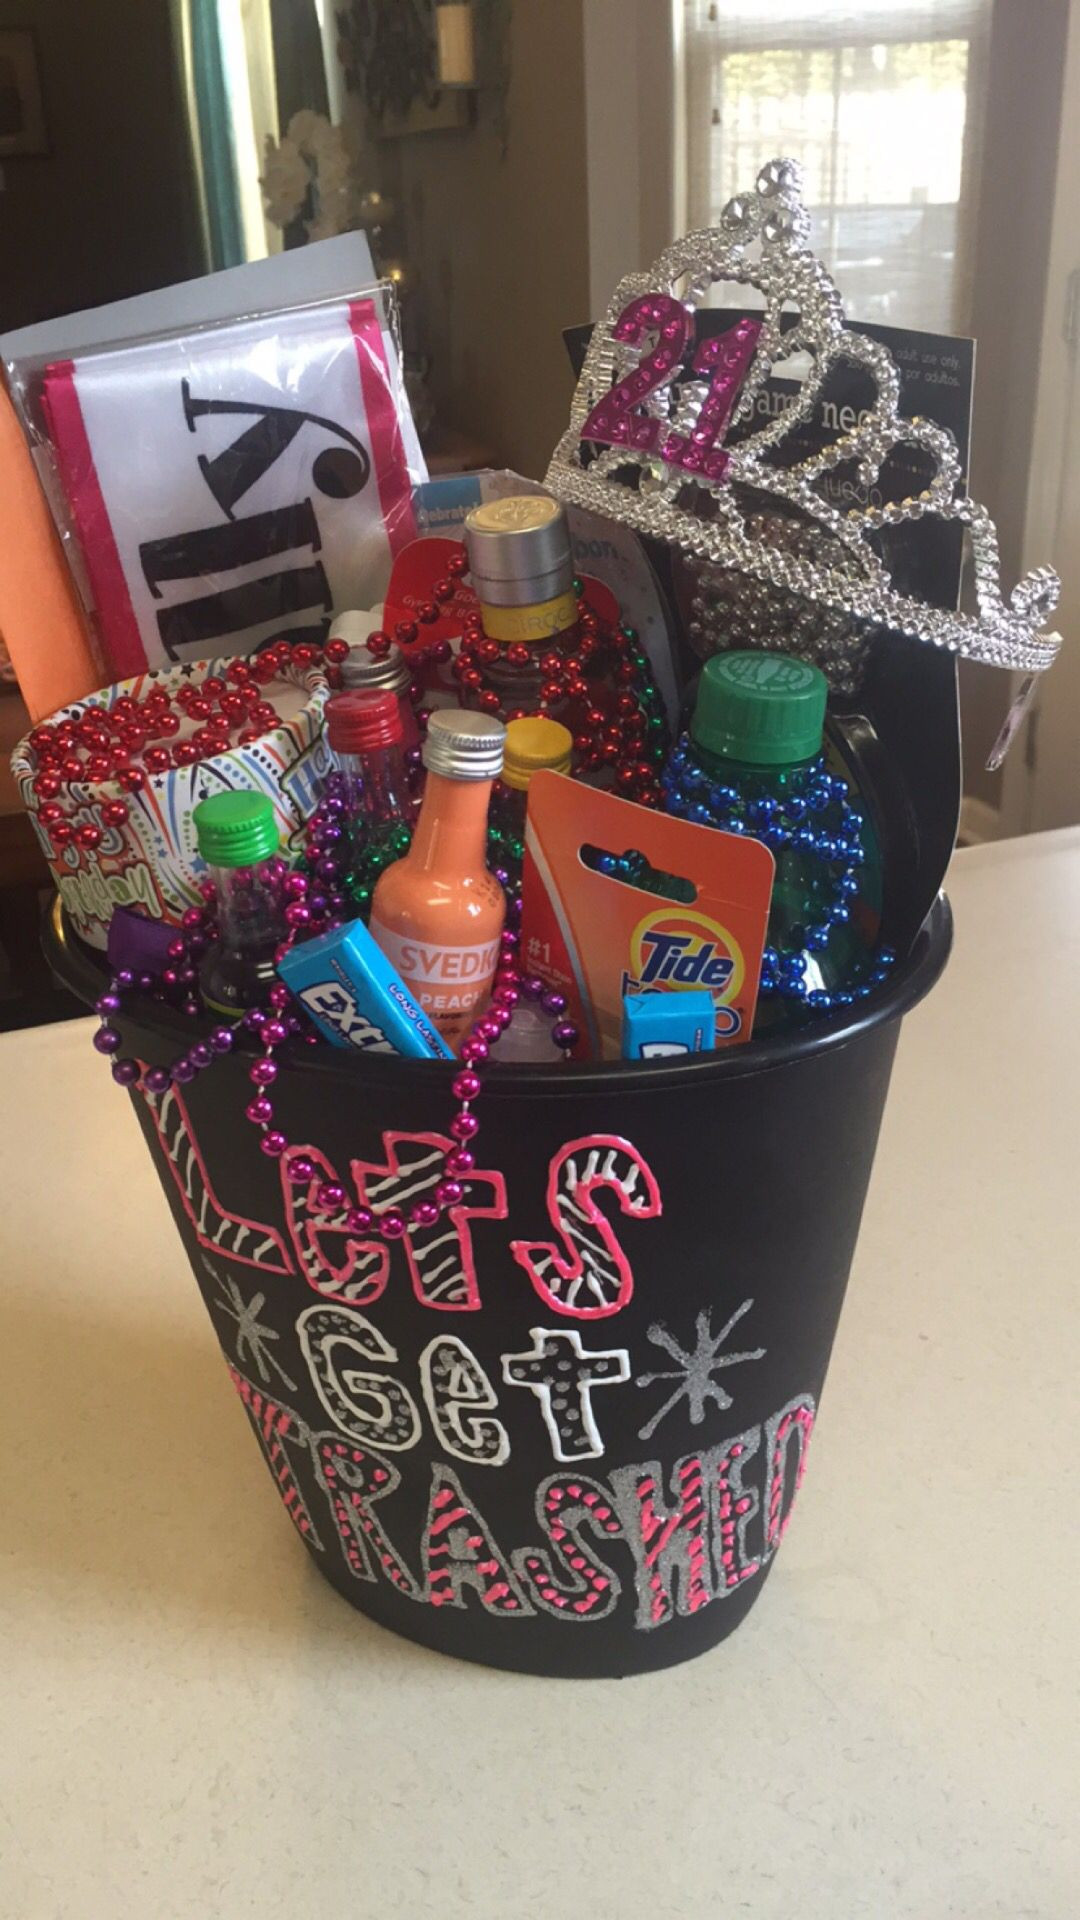 21St Anniversary Gift Ideas
 21st birthday t In a trash can saying "let s